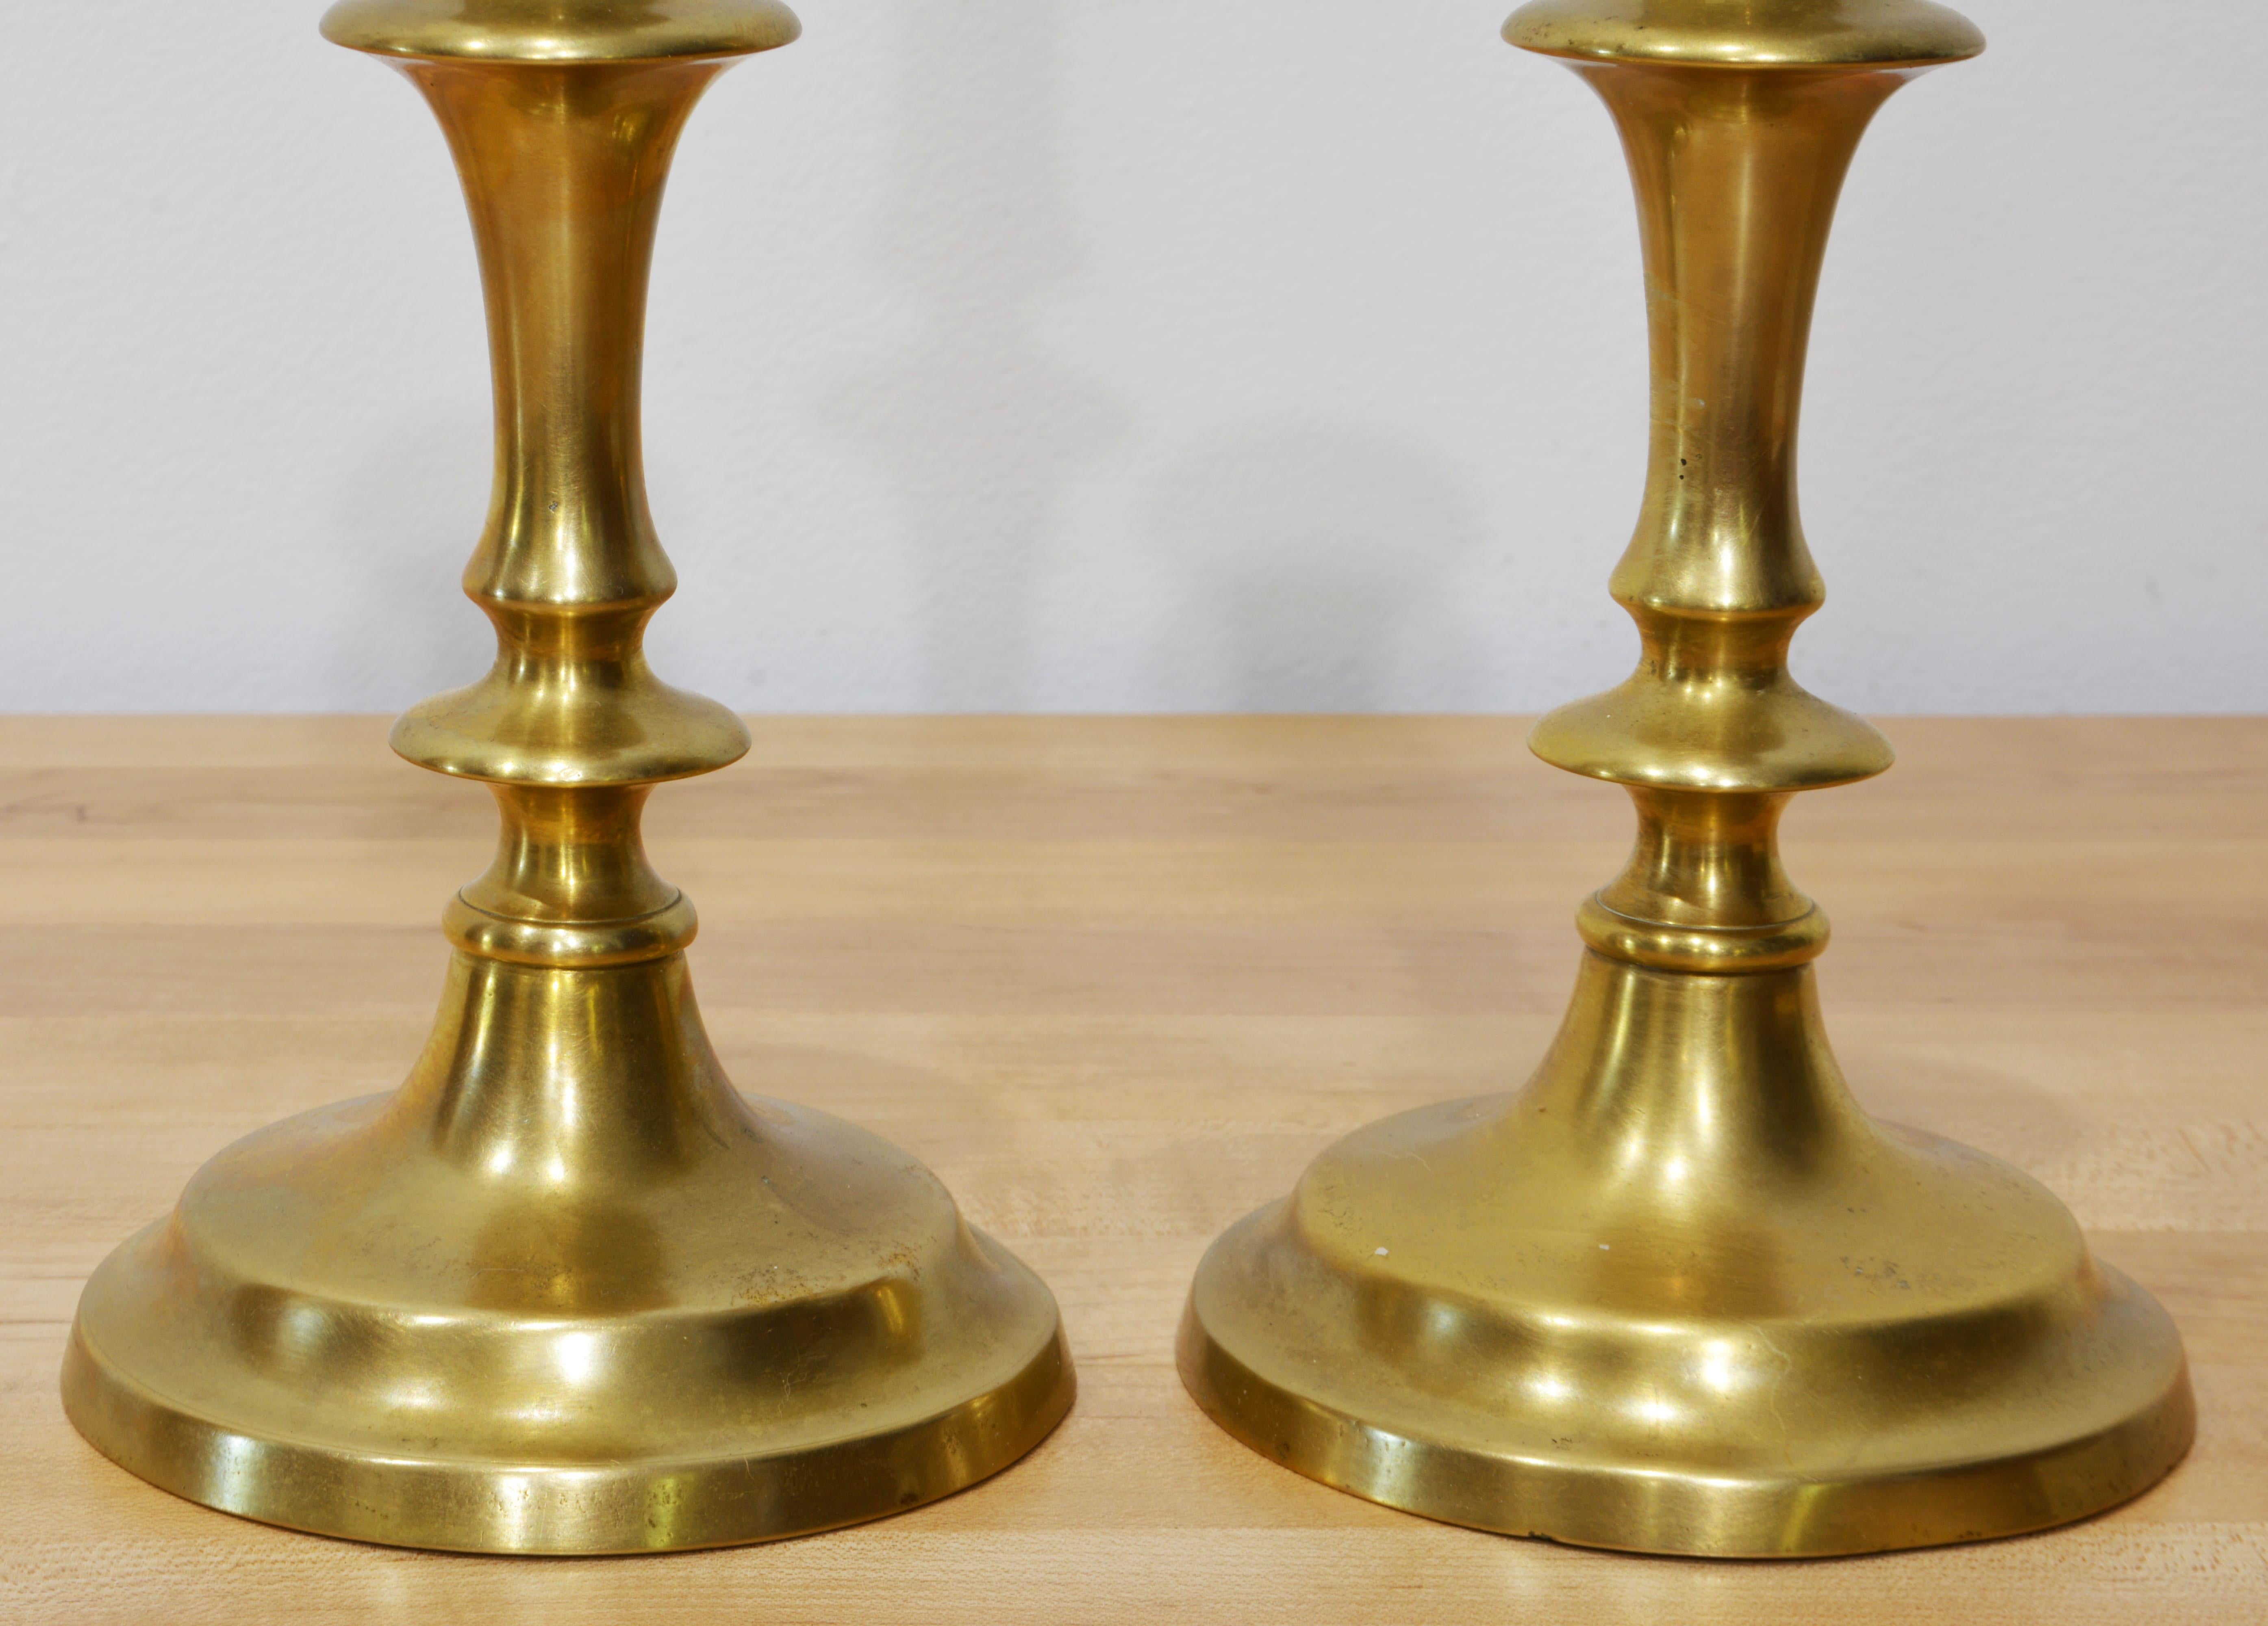 Pair of 18th Century English Queen Anne Brass Candle Sticks with Shaped Stems 1